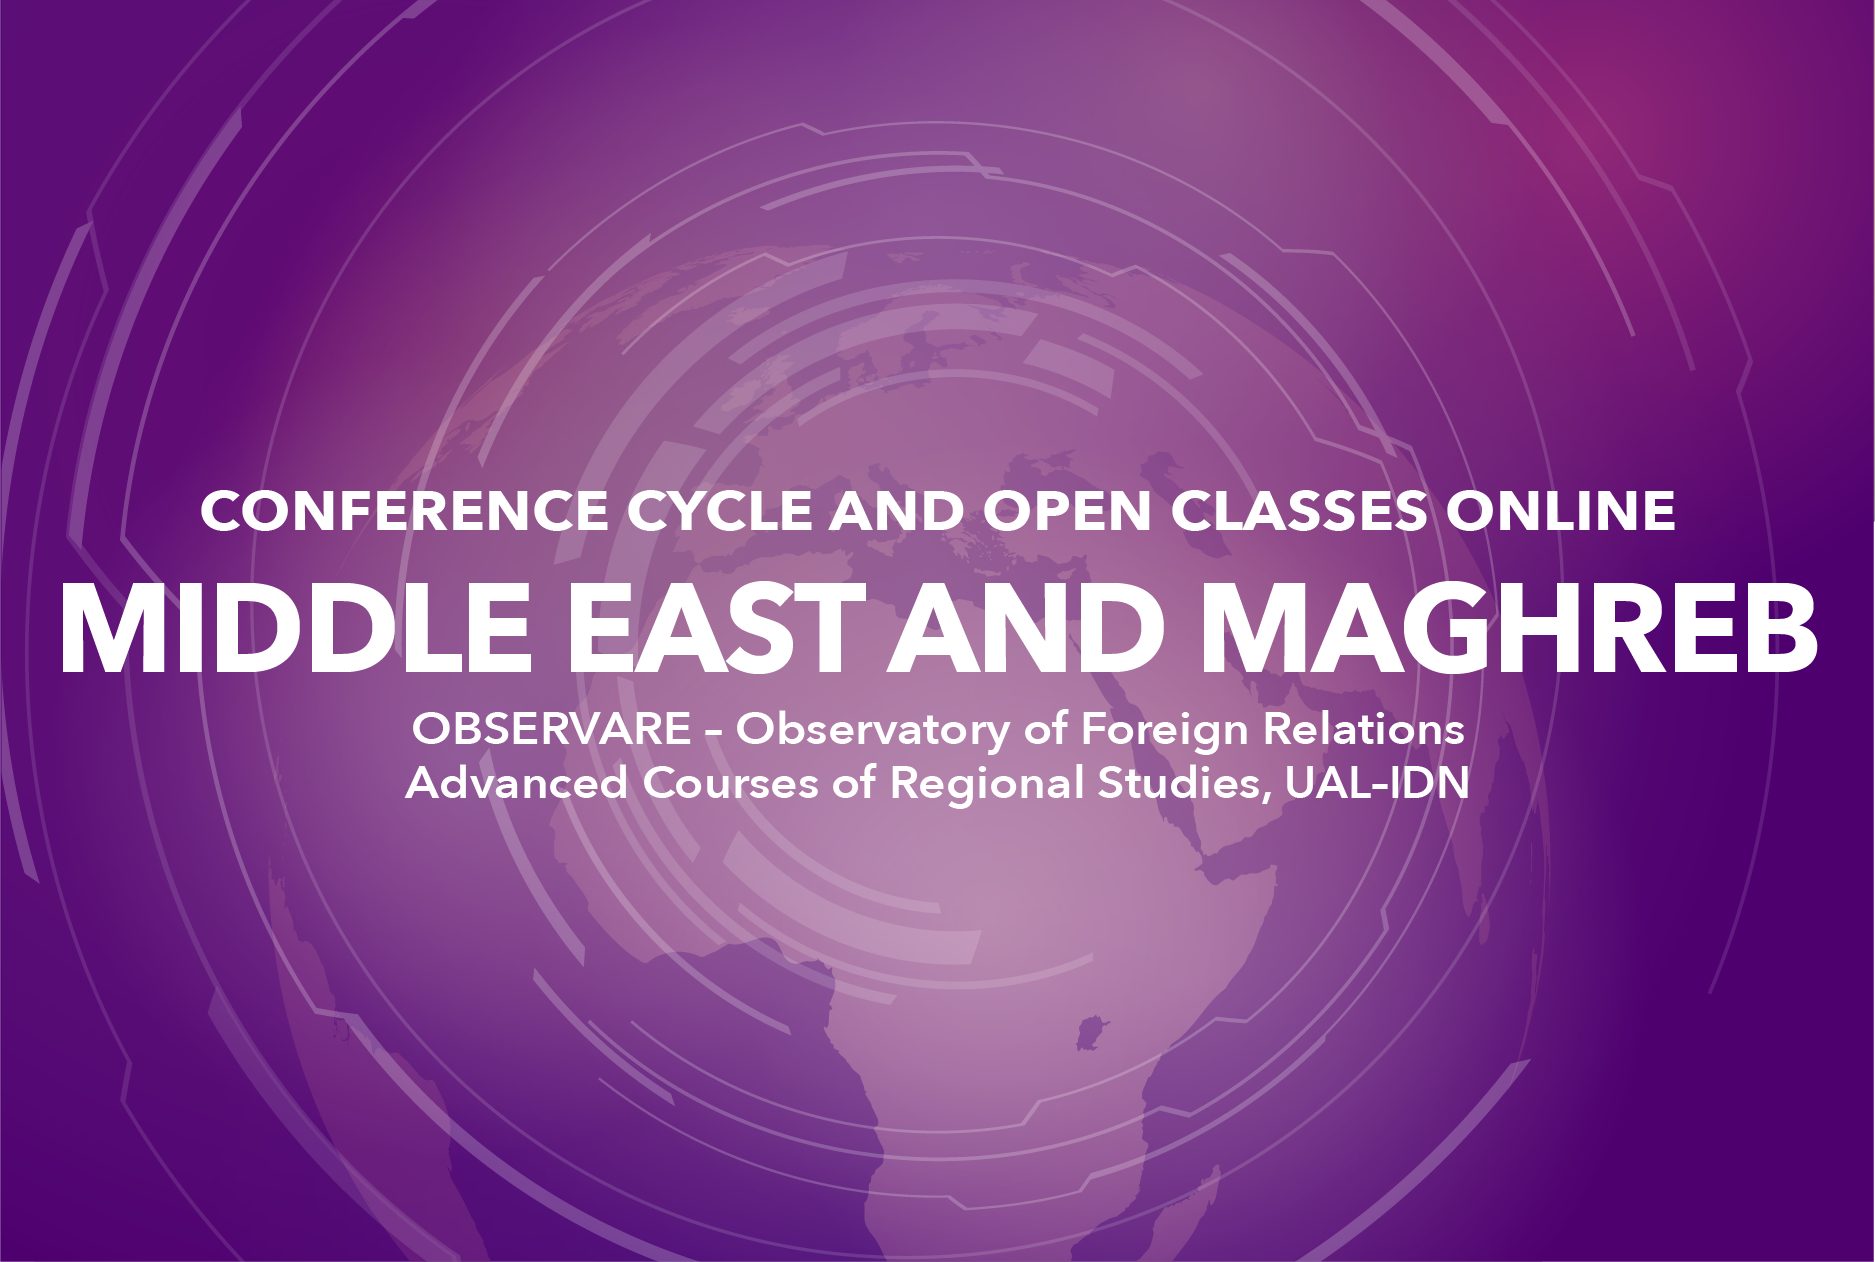 “MIDDLE EAST AND MAGHREB”  – CONFERENCE CYCLE AND OPEN CLASSES 2022 | UAL-IDN